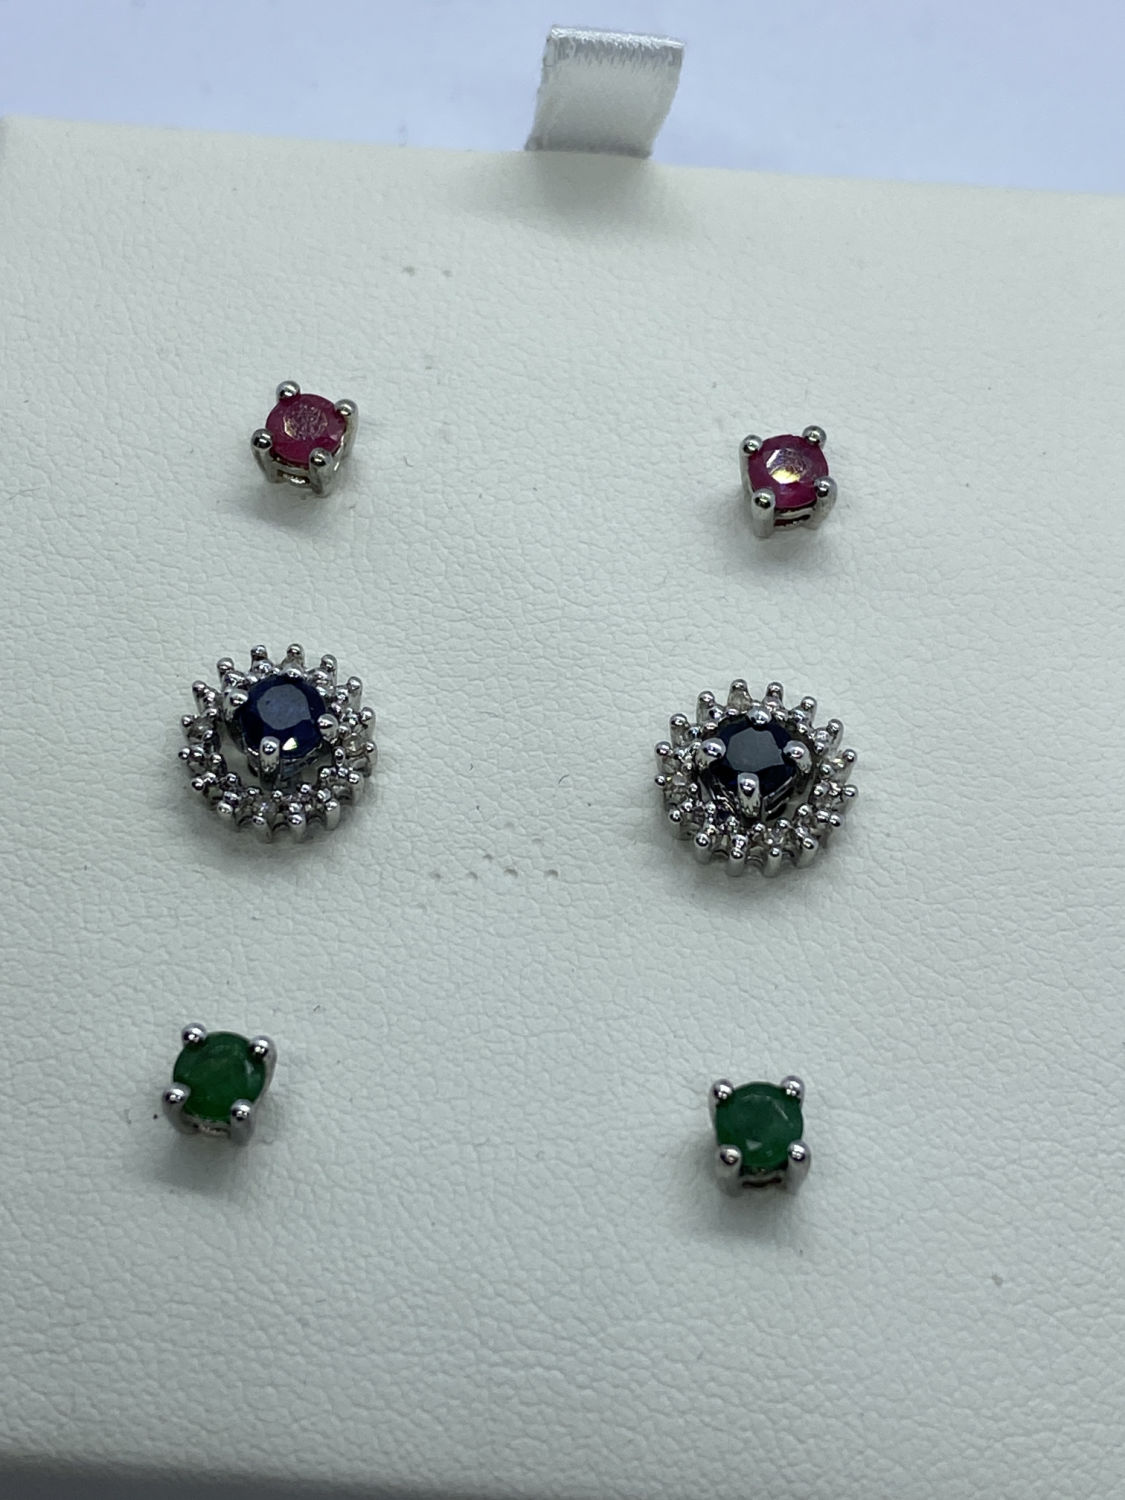 BLUE SAPPHIRE, RUBY, EMERALD AND DIAMOND INTERCHANGEABLE EARRINGS SET IN WHITE METAL